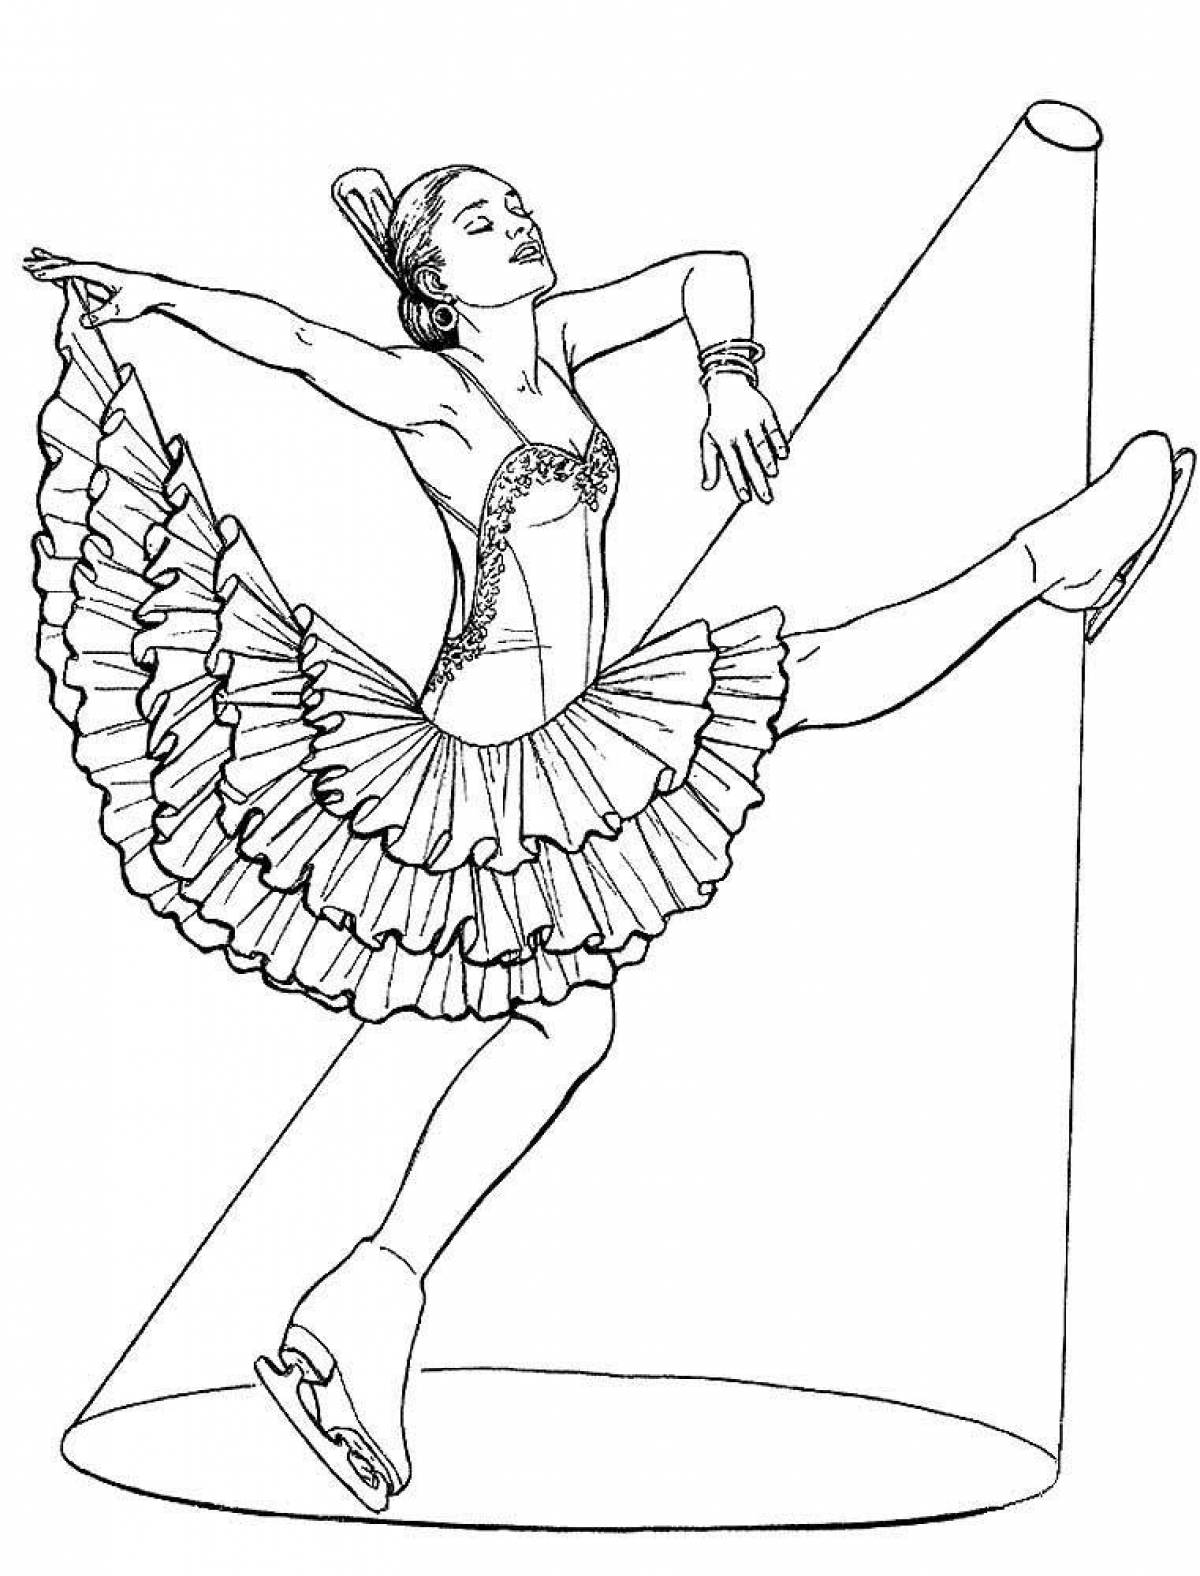 Amazing figure skating coloring page